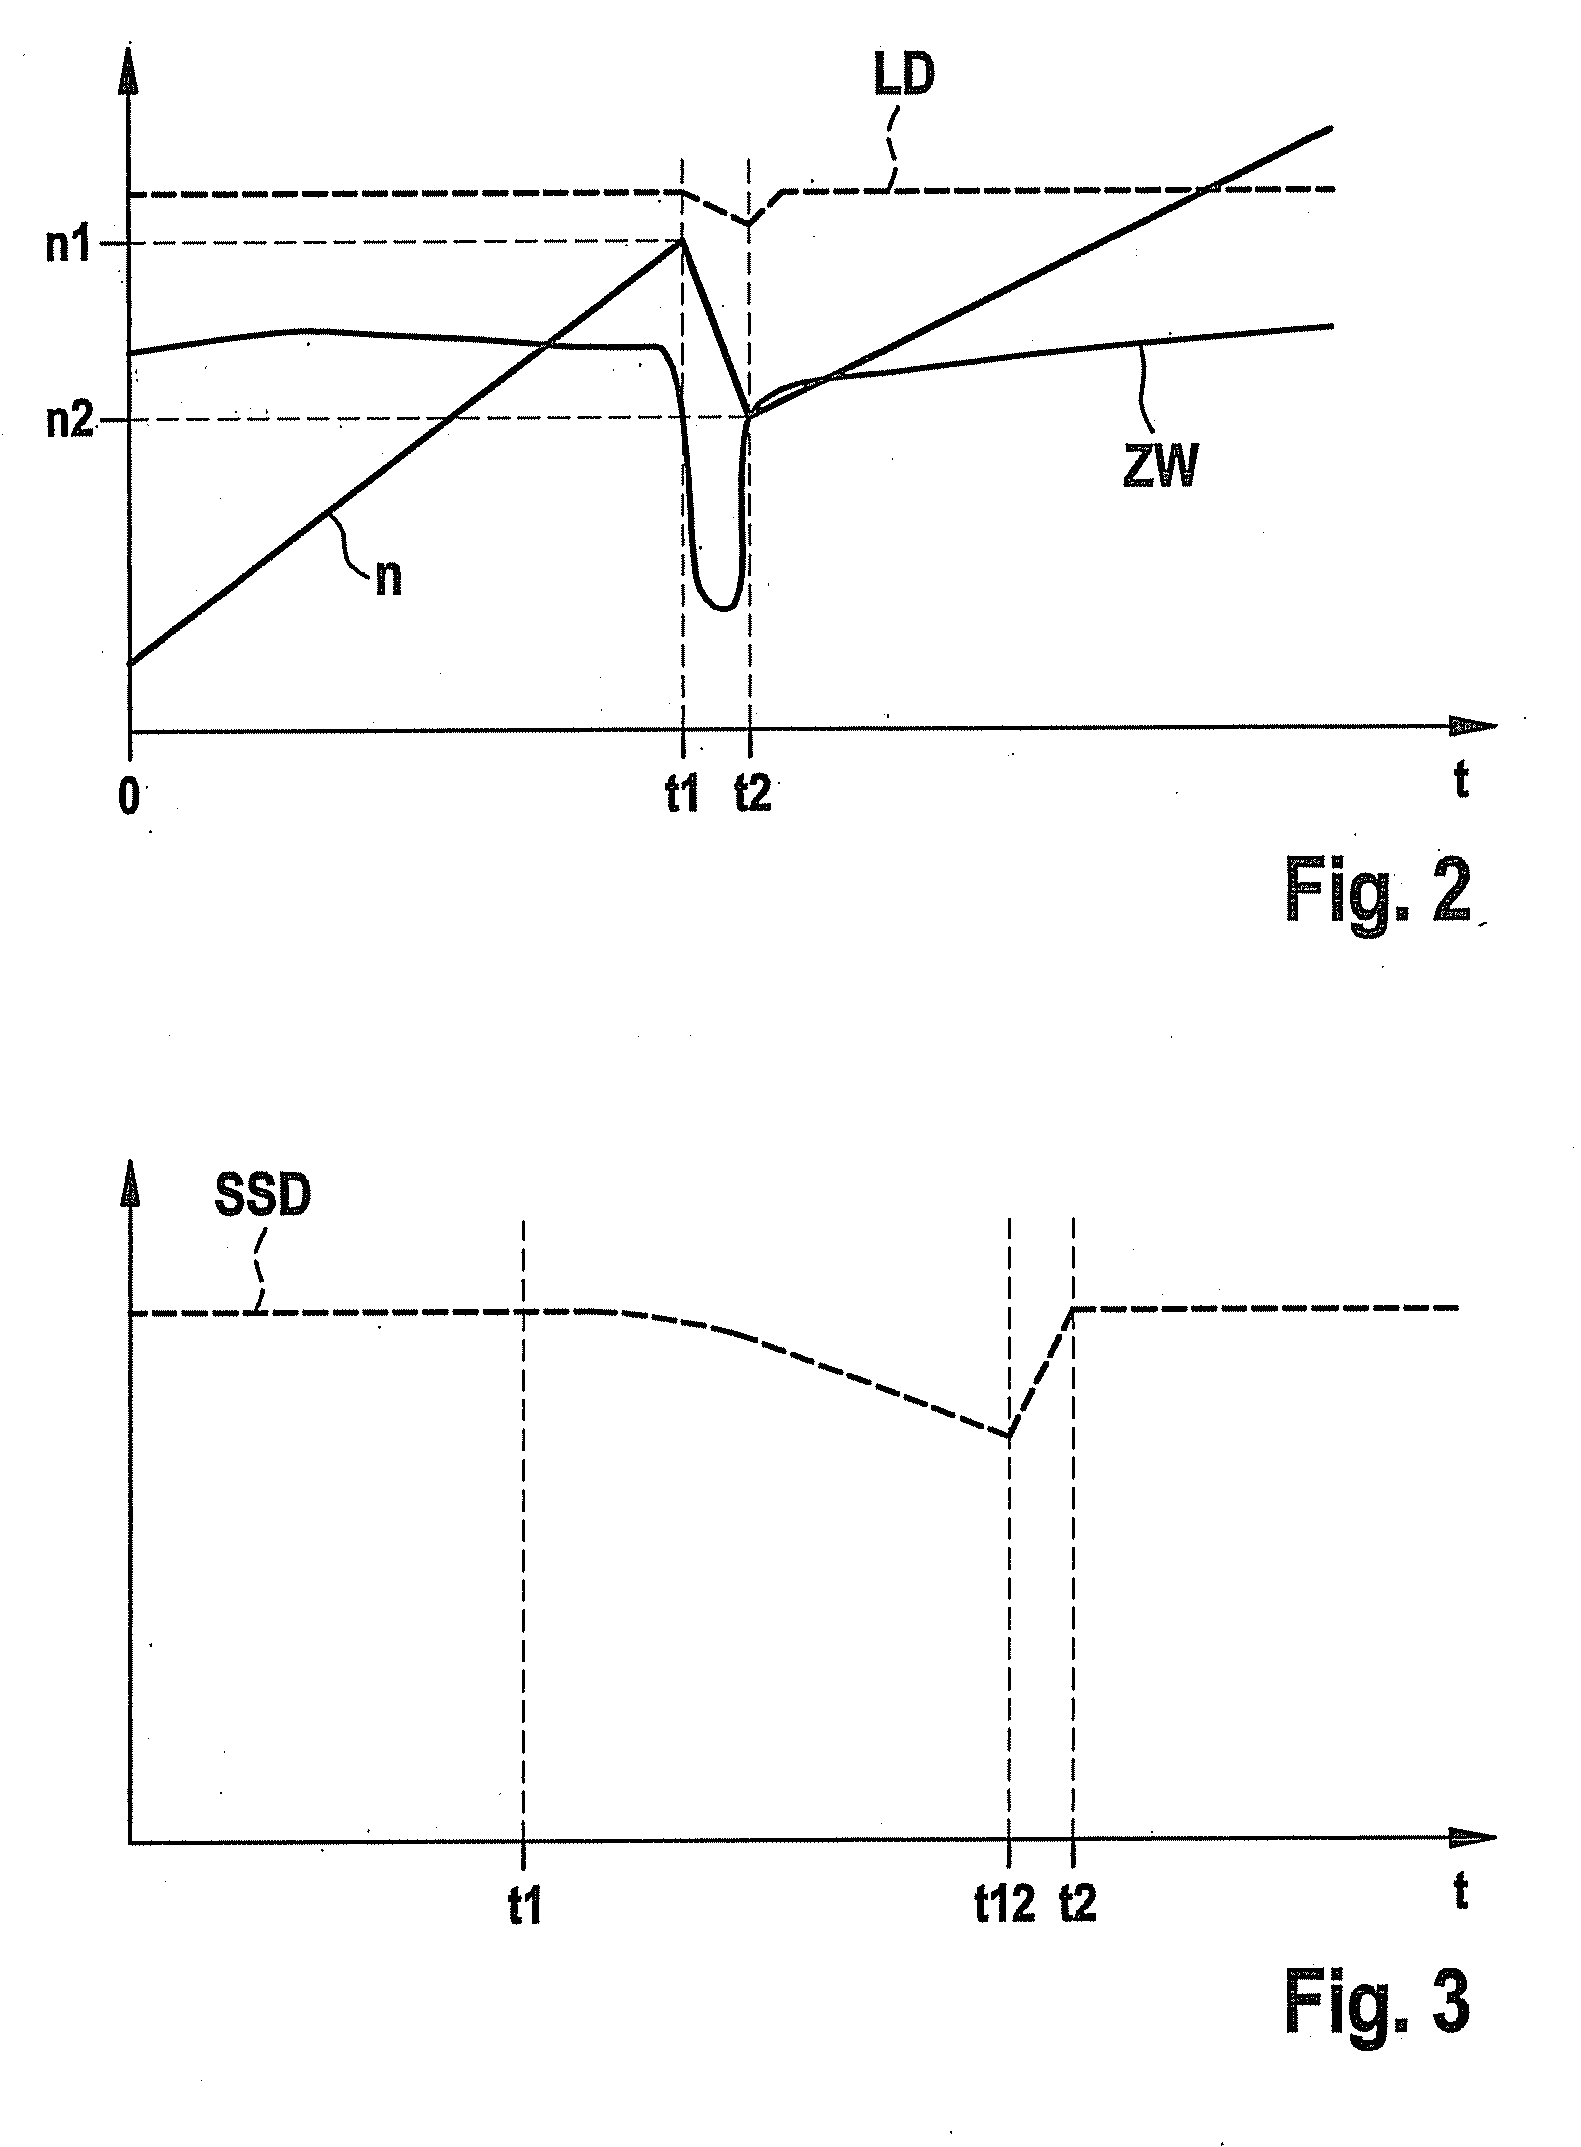 Method for operating an internal combustion engine using externally supplied ignition